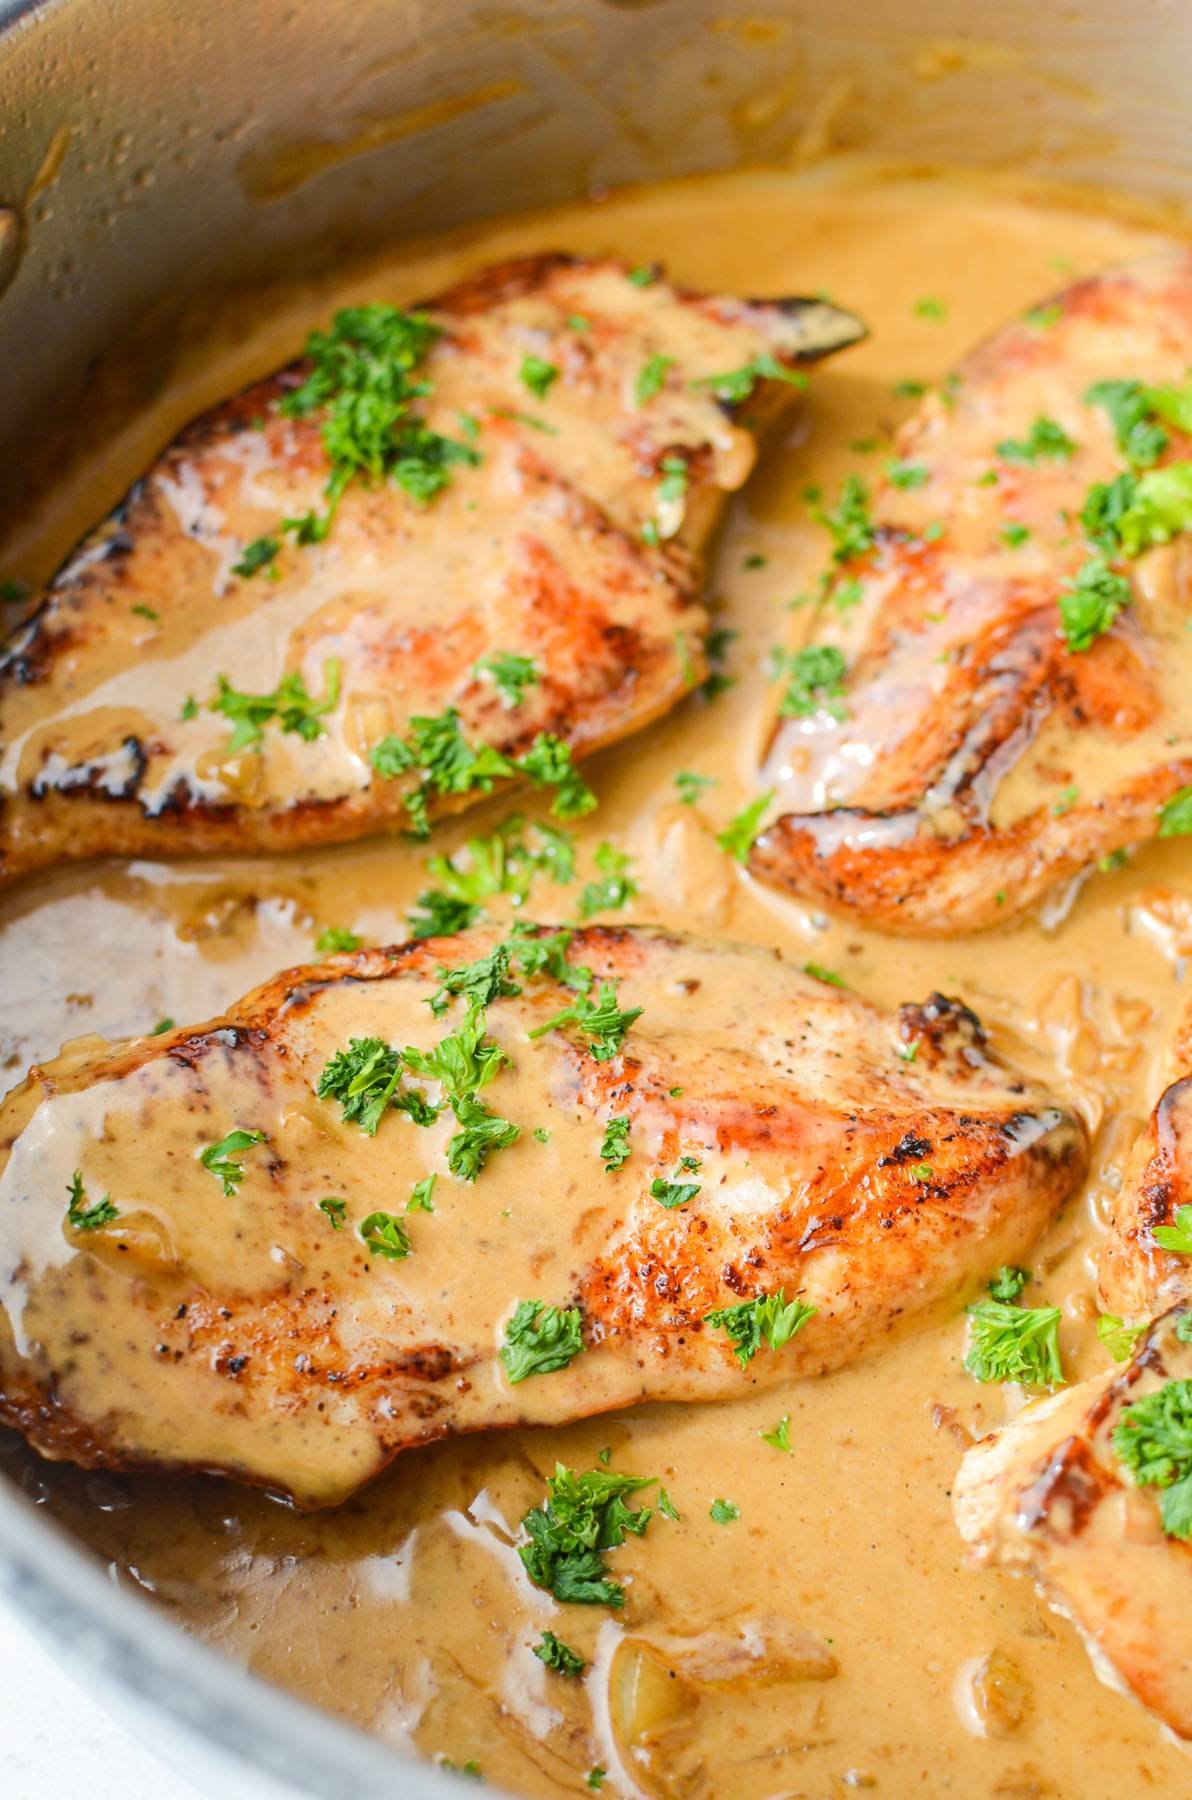 A close up of chicken in a skillet, coated in a light brown creamy garlic sauce.